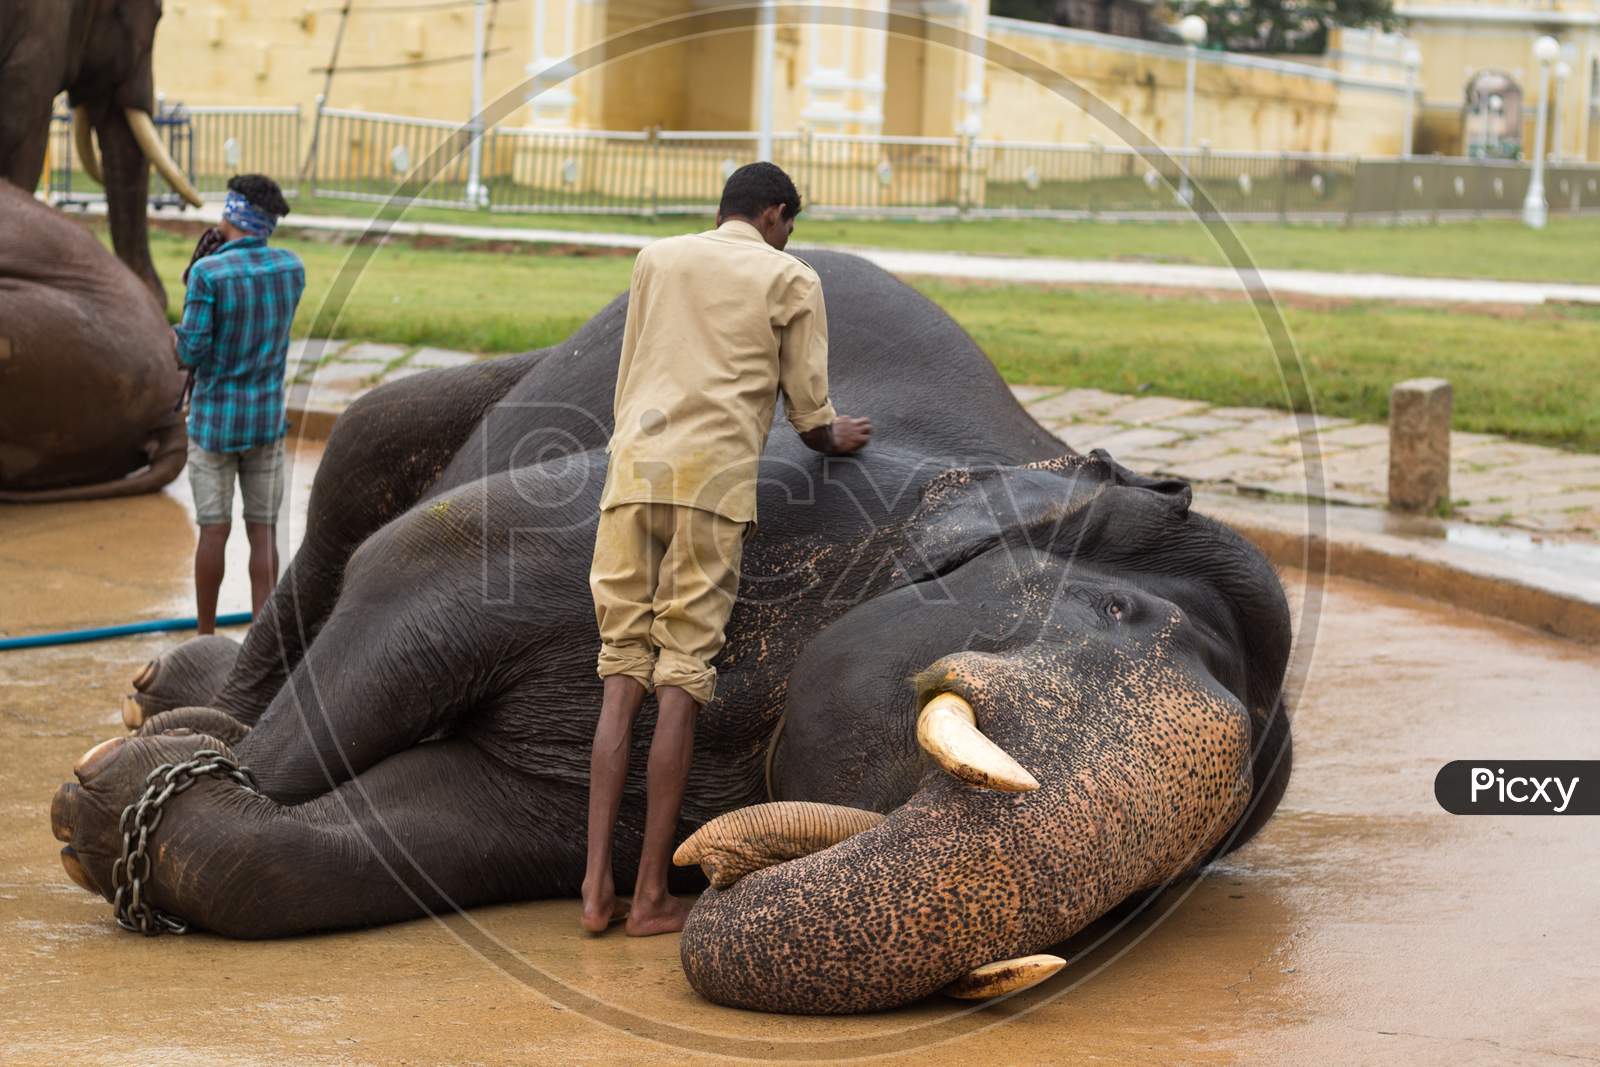 A Royal Elephant is being Massaged  by the Mahout inside Palace premises during the Dasara Festival at Mysuru in Karnataka/India.